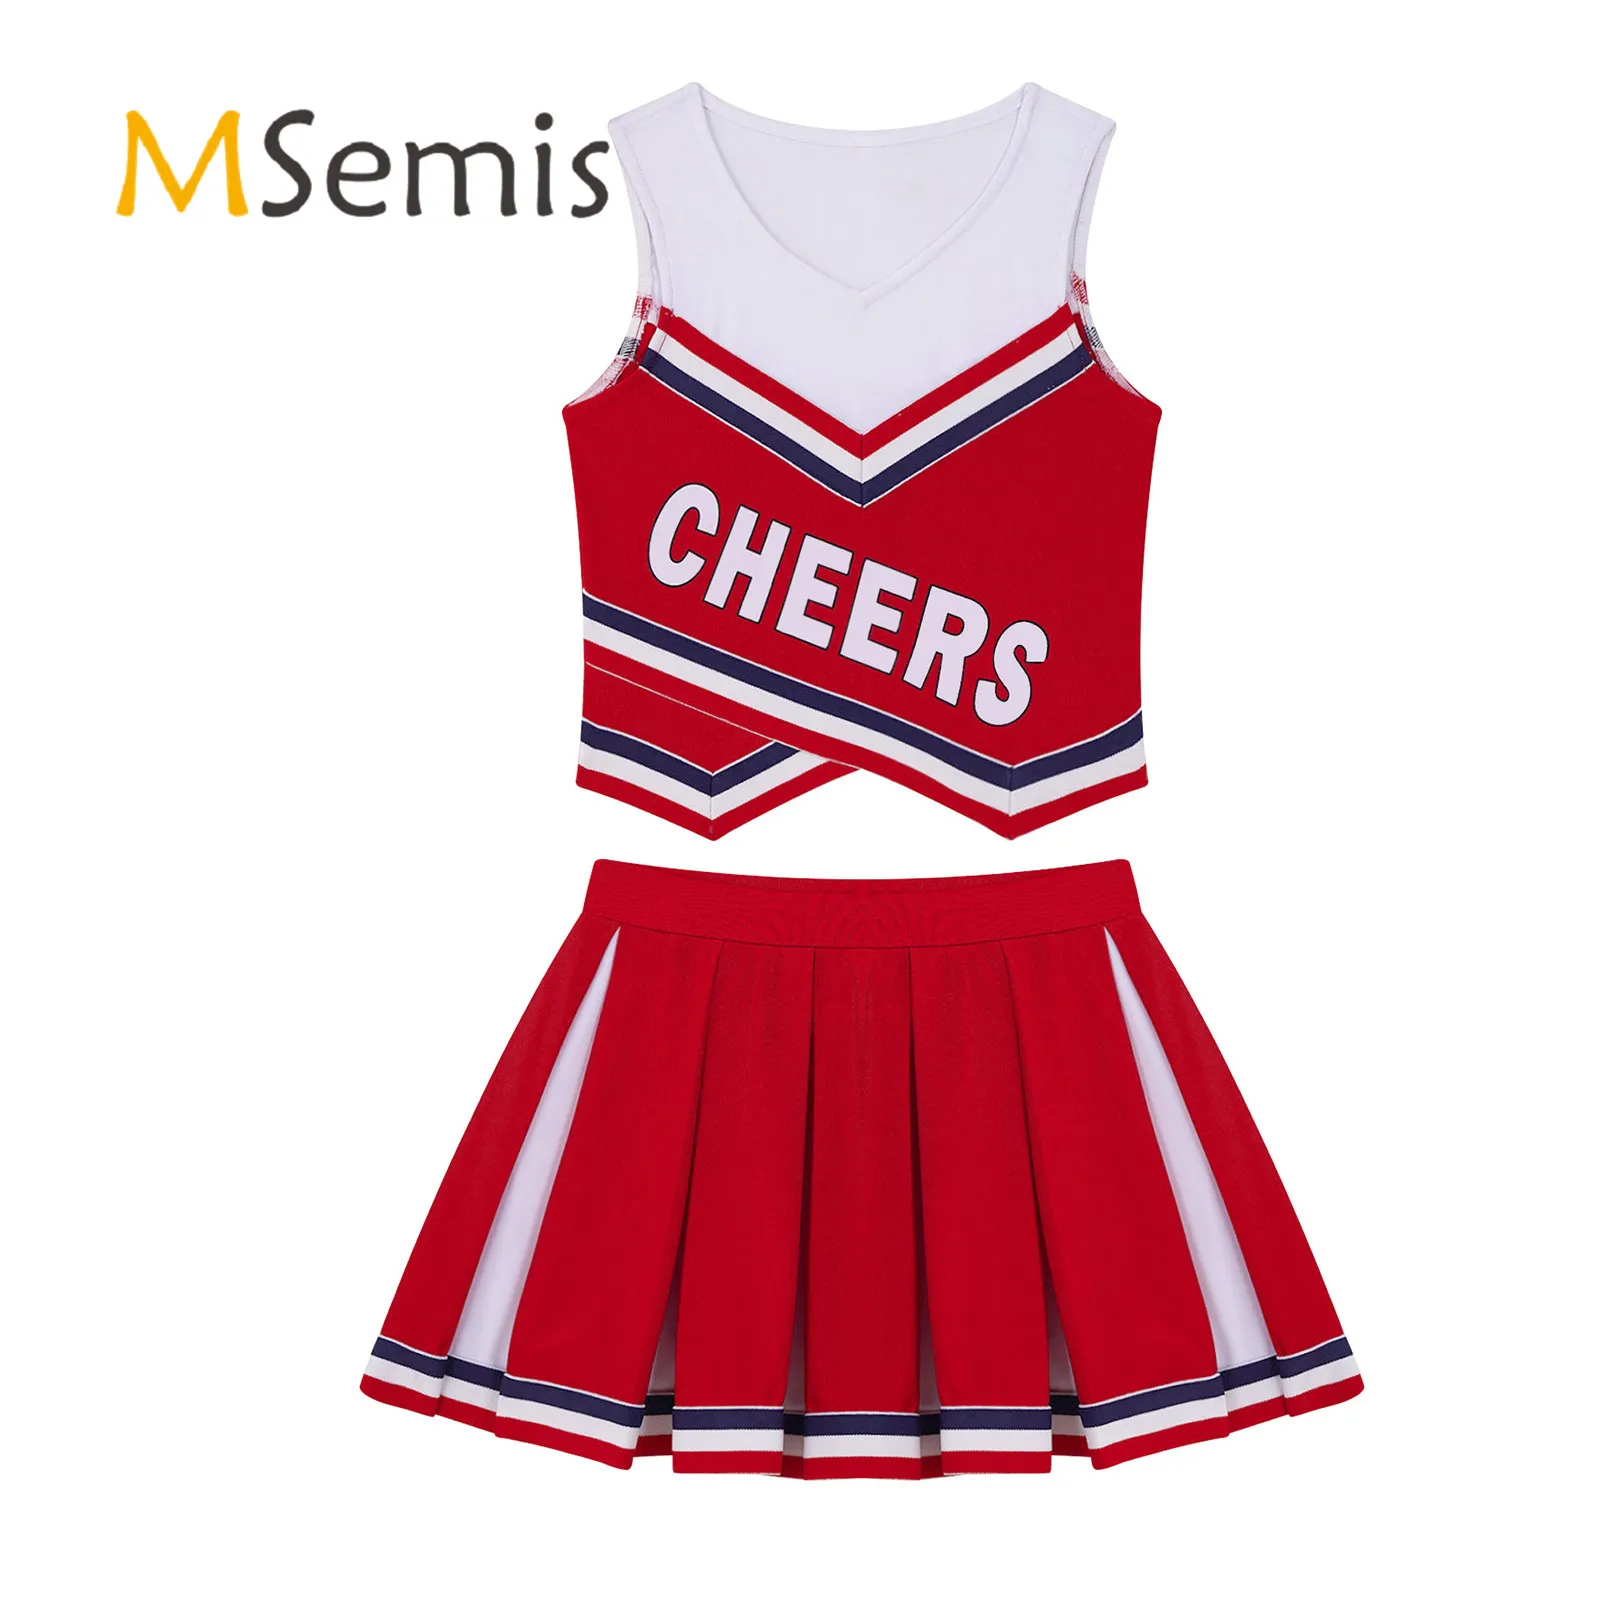 2Pcs Kids Girls Sport Dance Suit Cheerleader Costume V Neck Sleeveless Letters Cheers Print Vest and Pleated Skirt Set Outfit